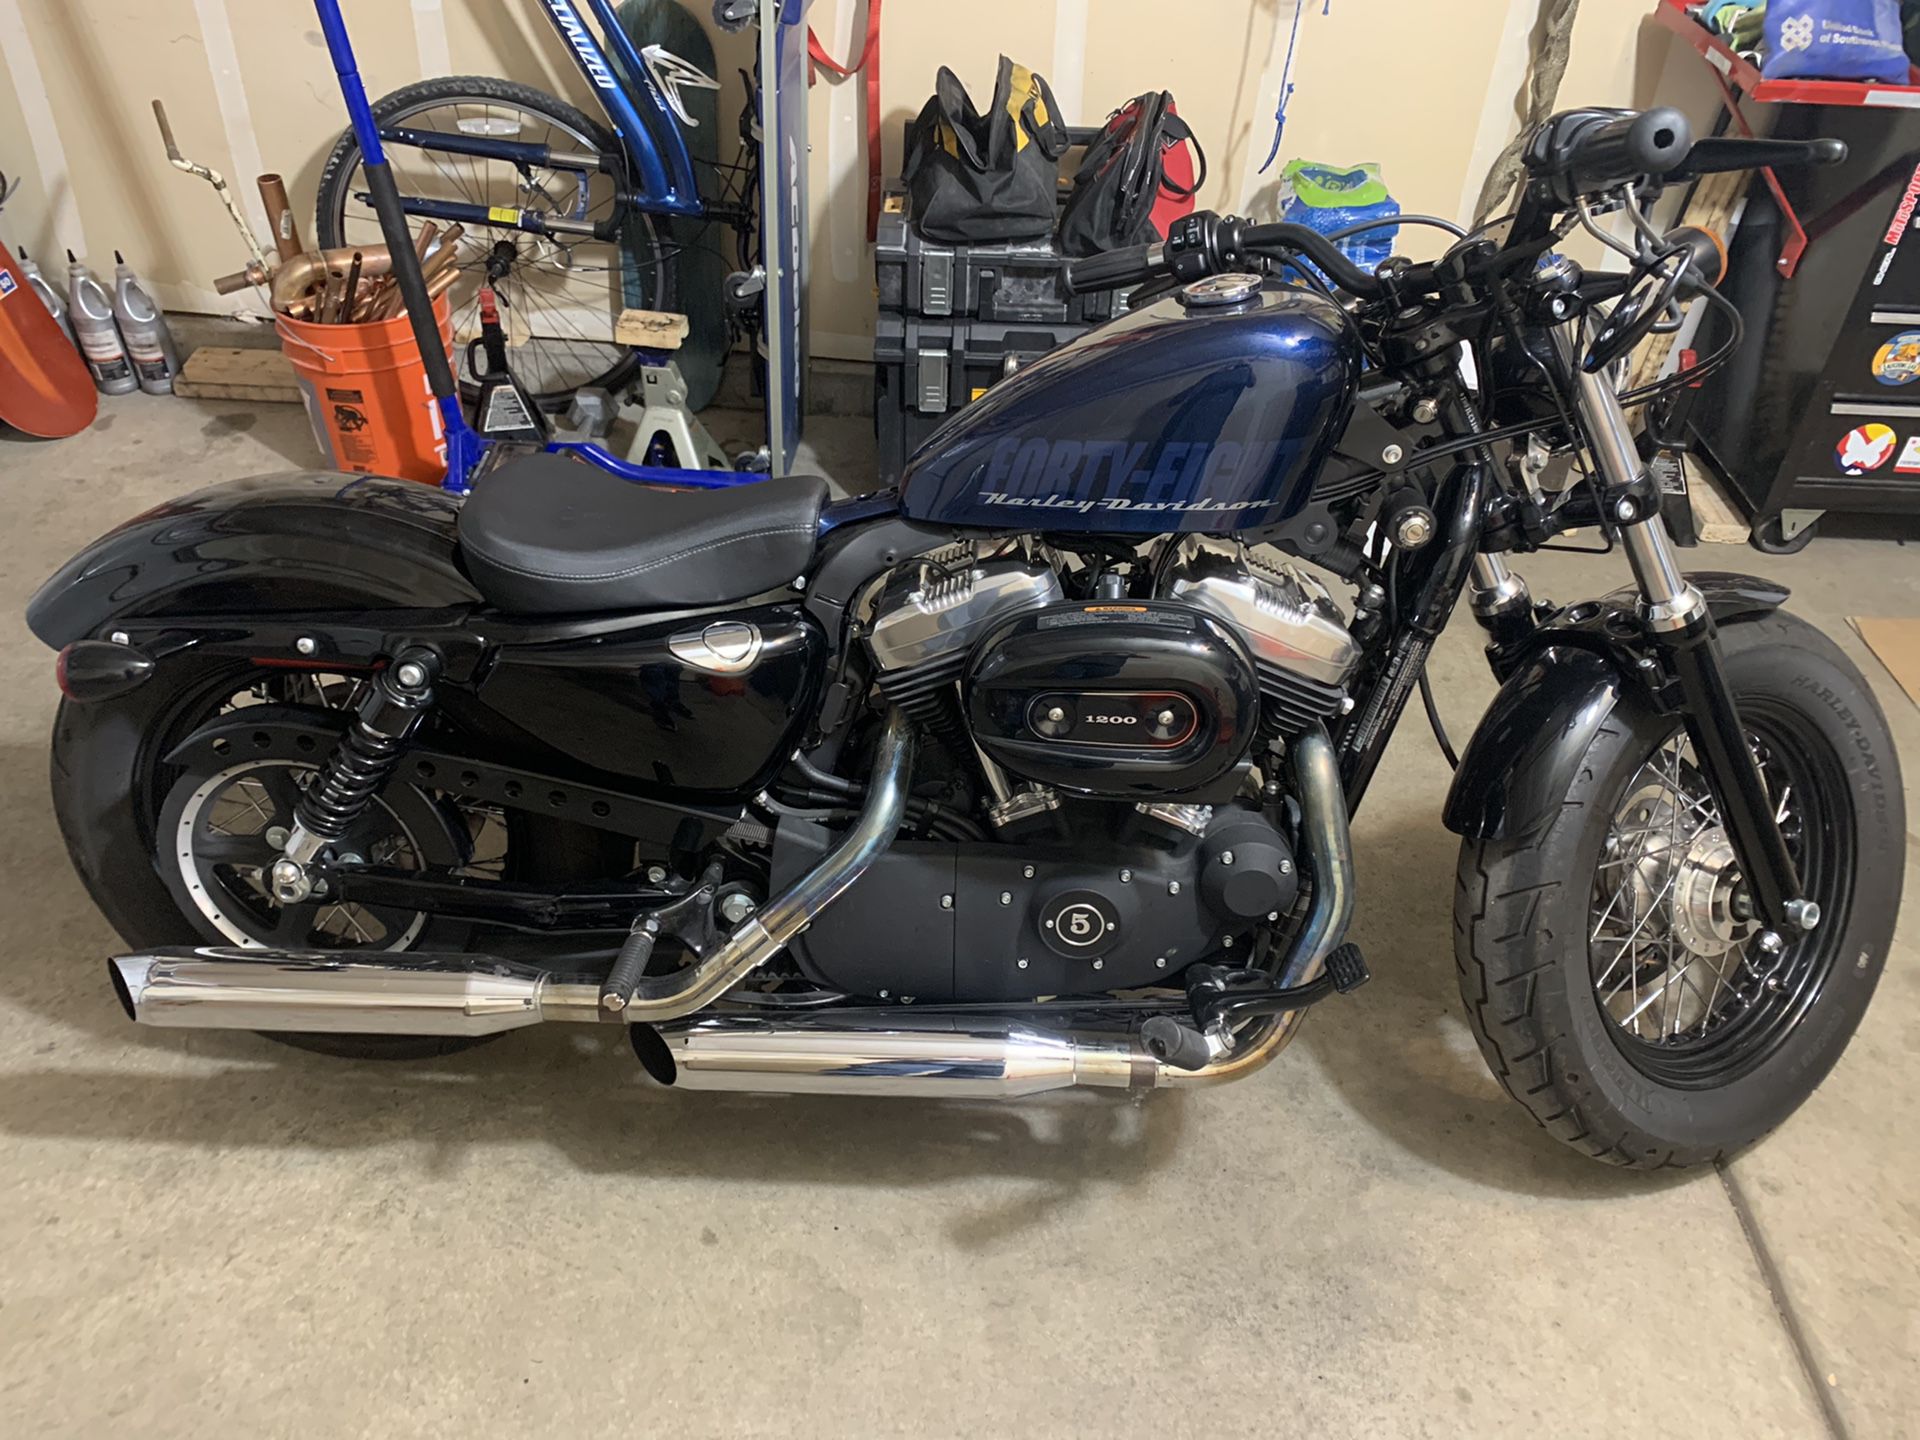 2013 Harley-Sportster 48, Runs perfectly, Less than 4000 miles, This bike is ready to ride